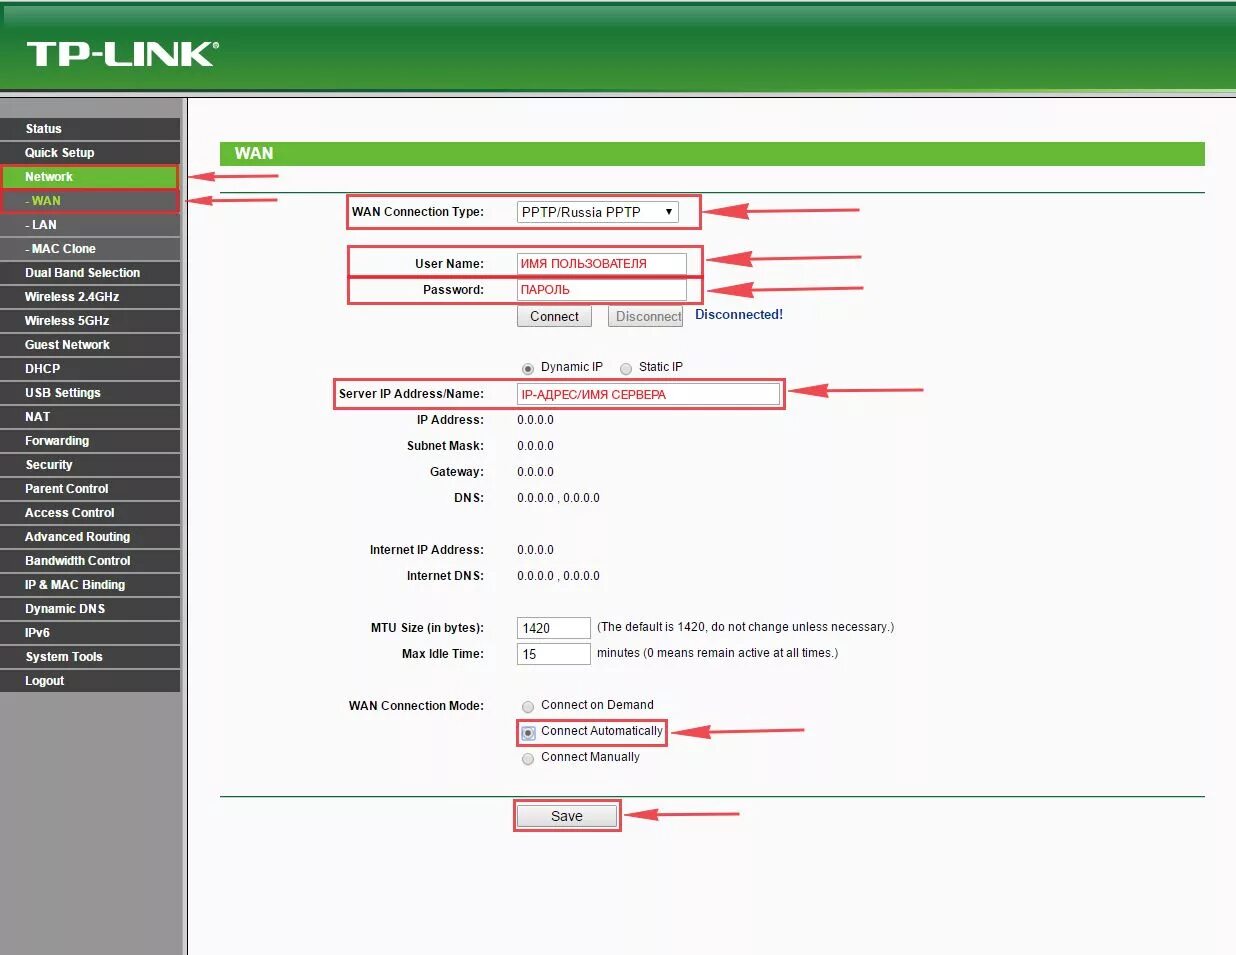 Tp support. TP-link_37c2. Роутер ТП линк с lan. TL-wr741n TP link роутер. 1040 TP-link.